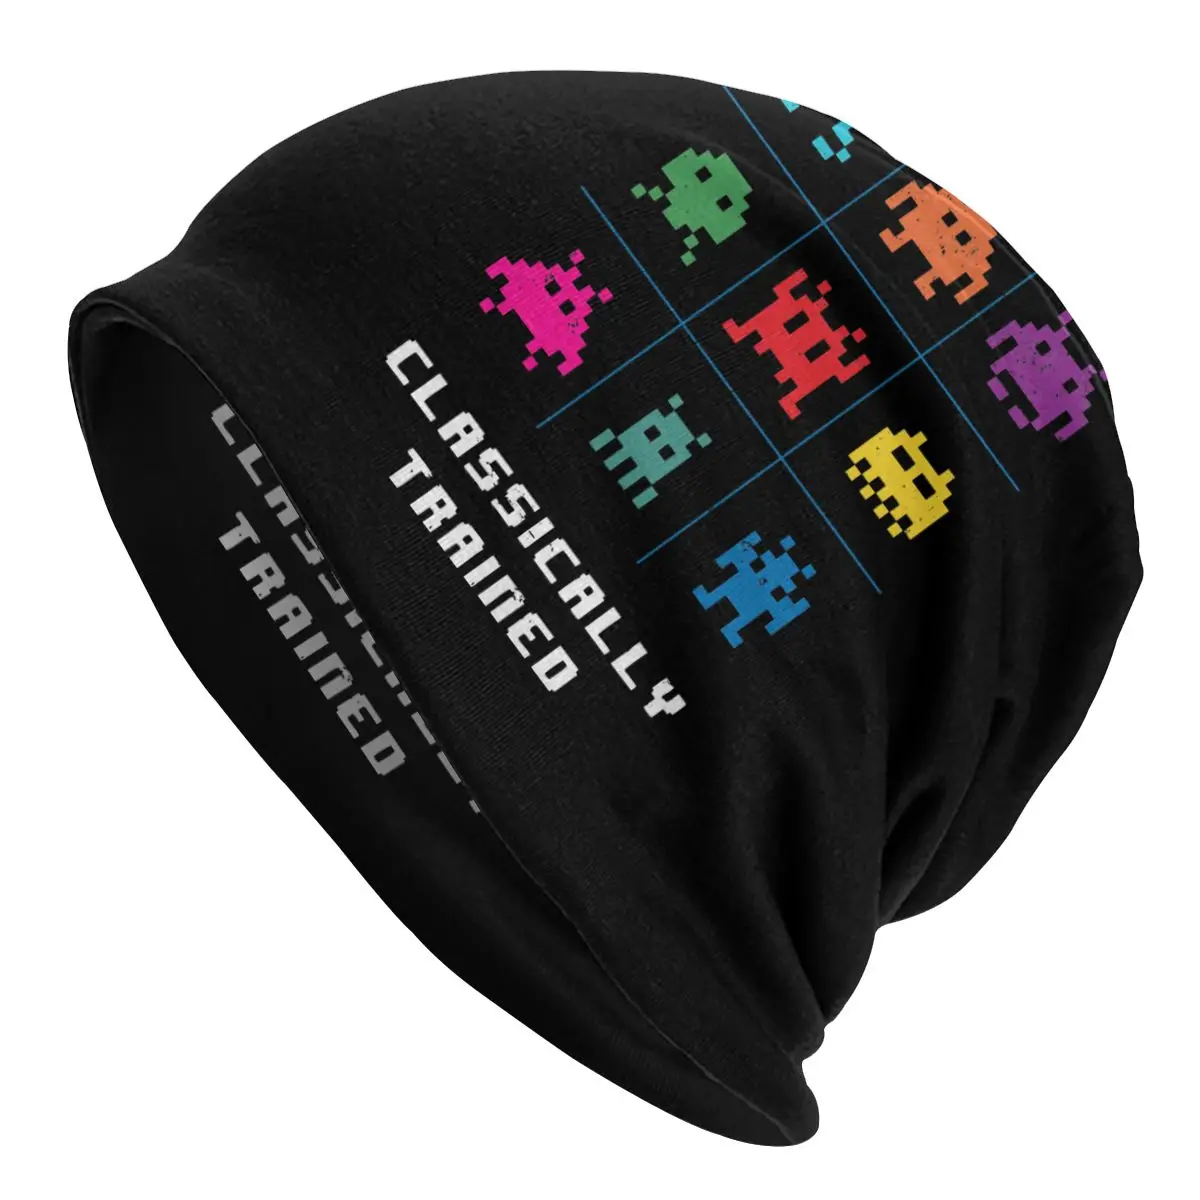 

Trained 80s Space Invaders Arcade Games Bonnet Hats Autumn Winter Skullies Beanies Hat for Men Women Knitting Hats Warm Caps